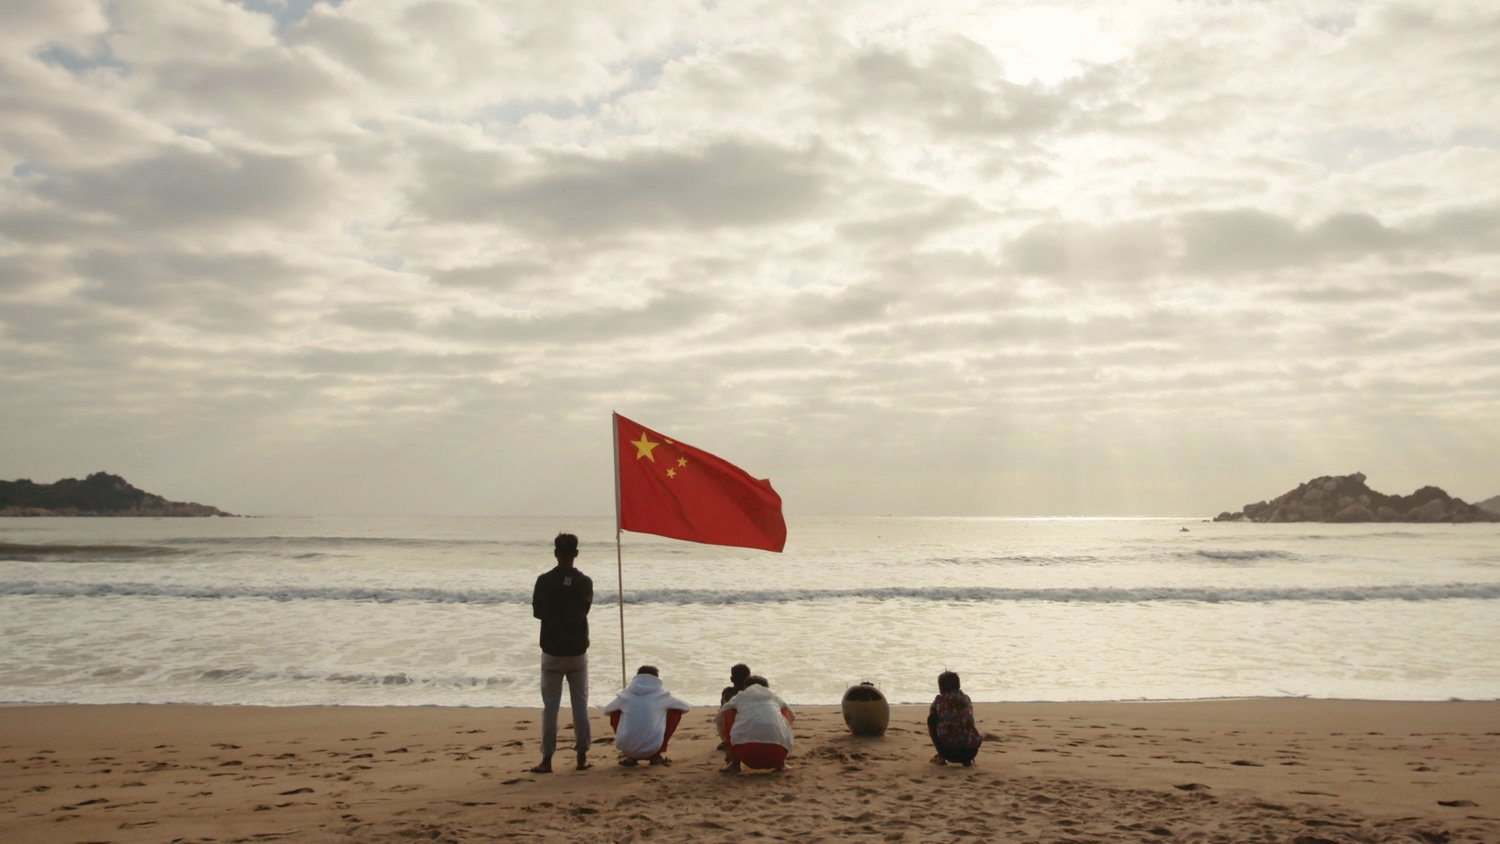 Created in hopes of bringing surfers to the 2021 Summer Olympics in Tokyo, the Chinese national surfing team was started with around 100 aspiring surfers.